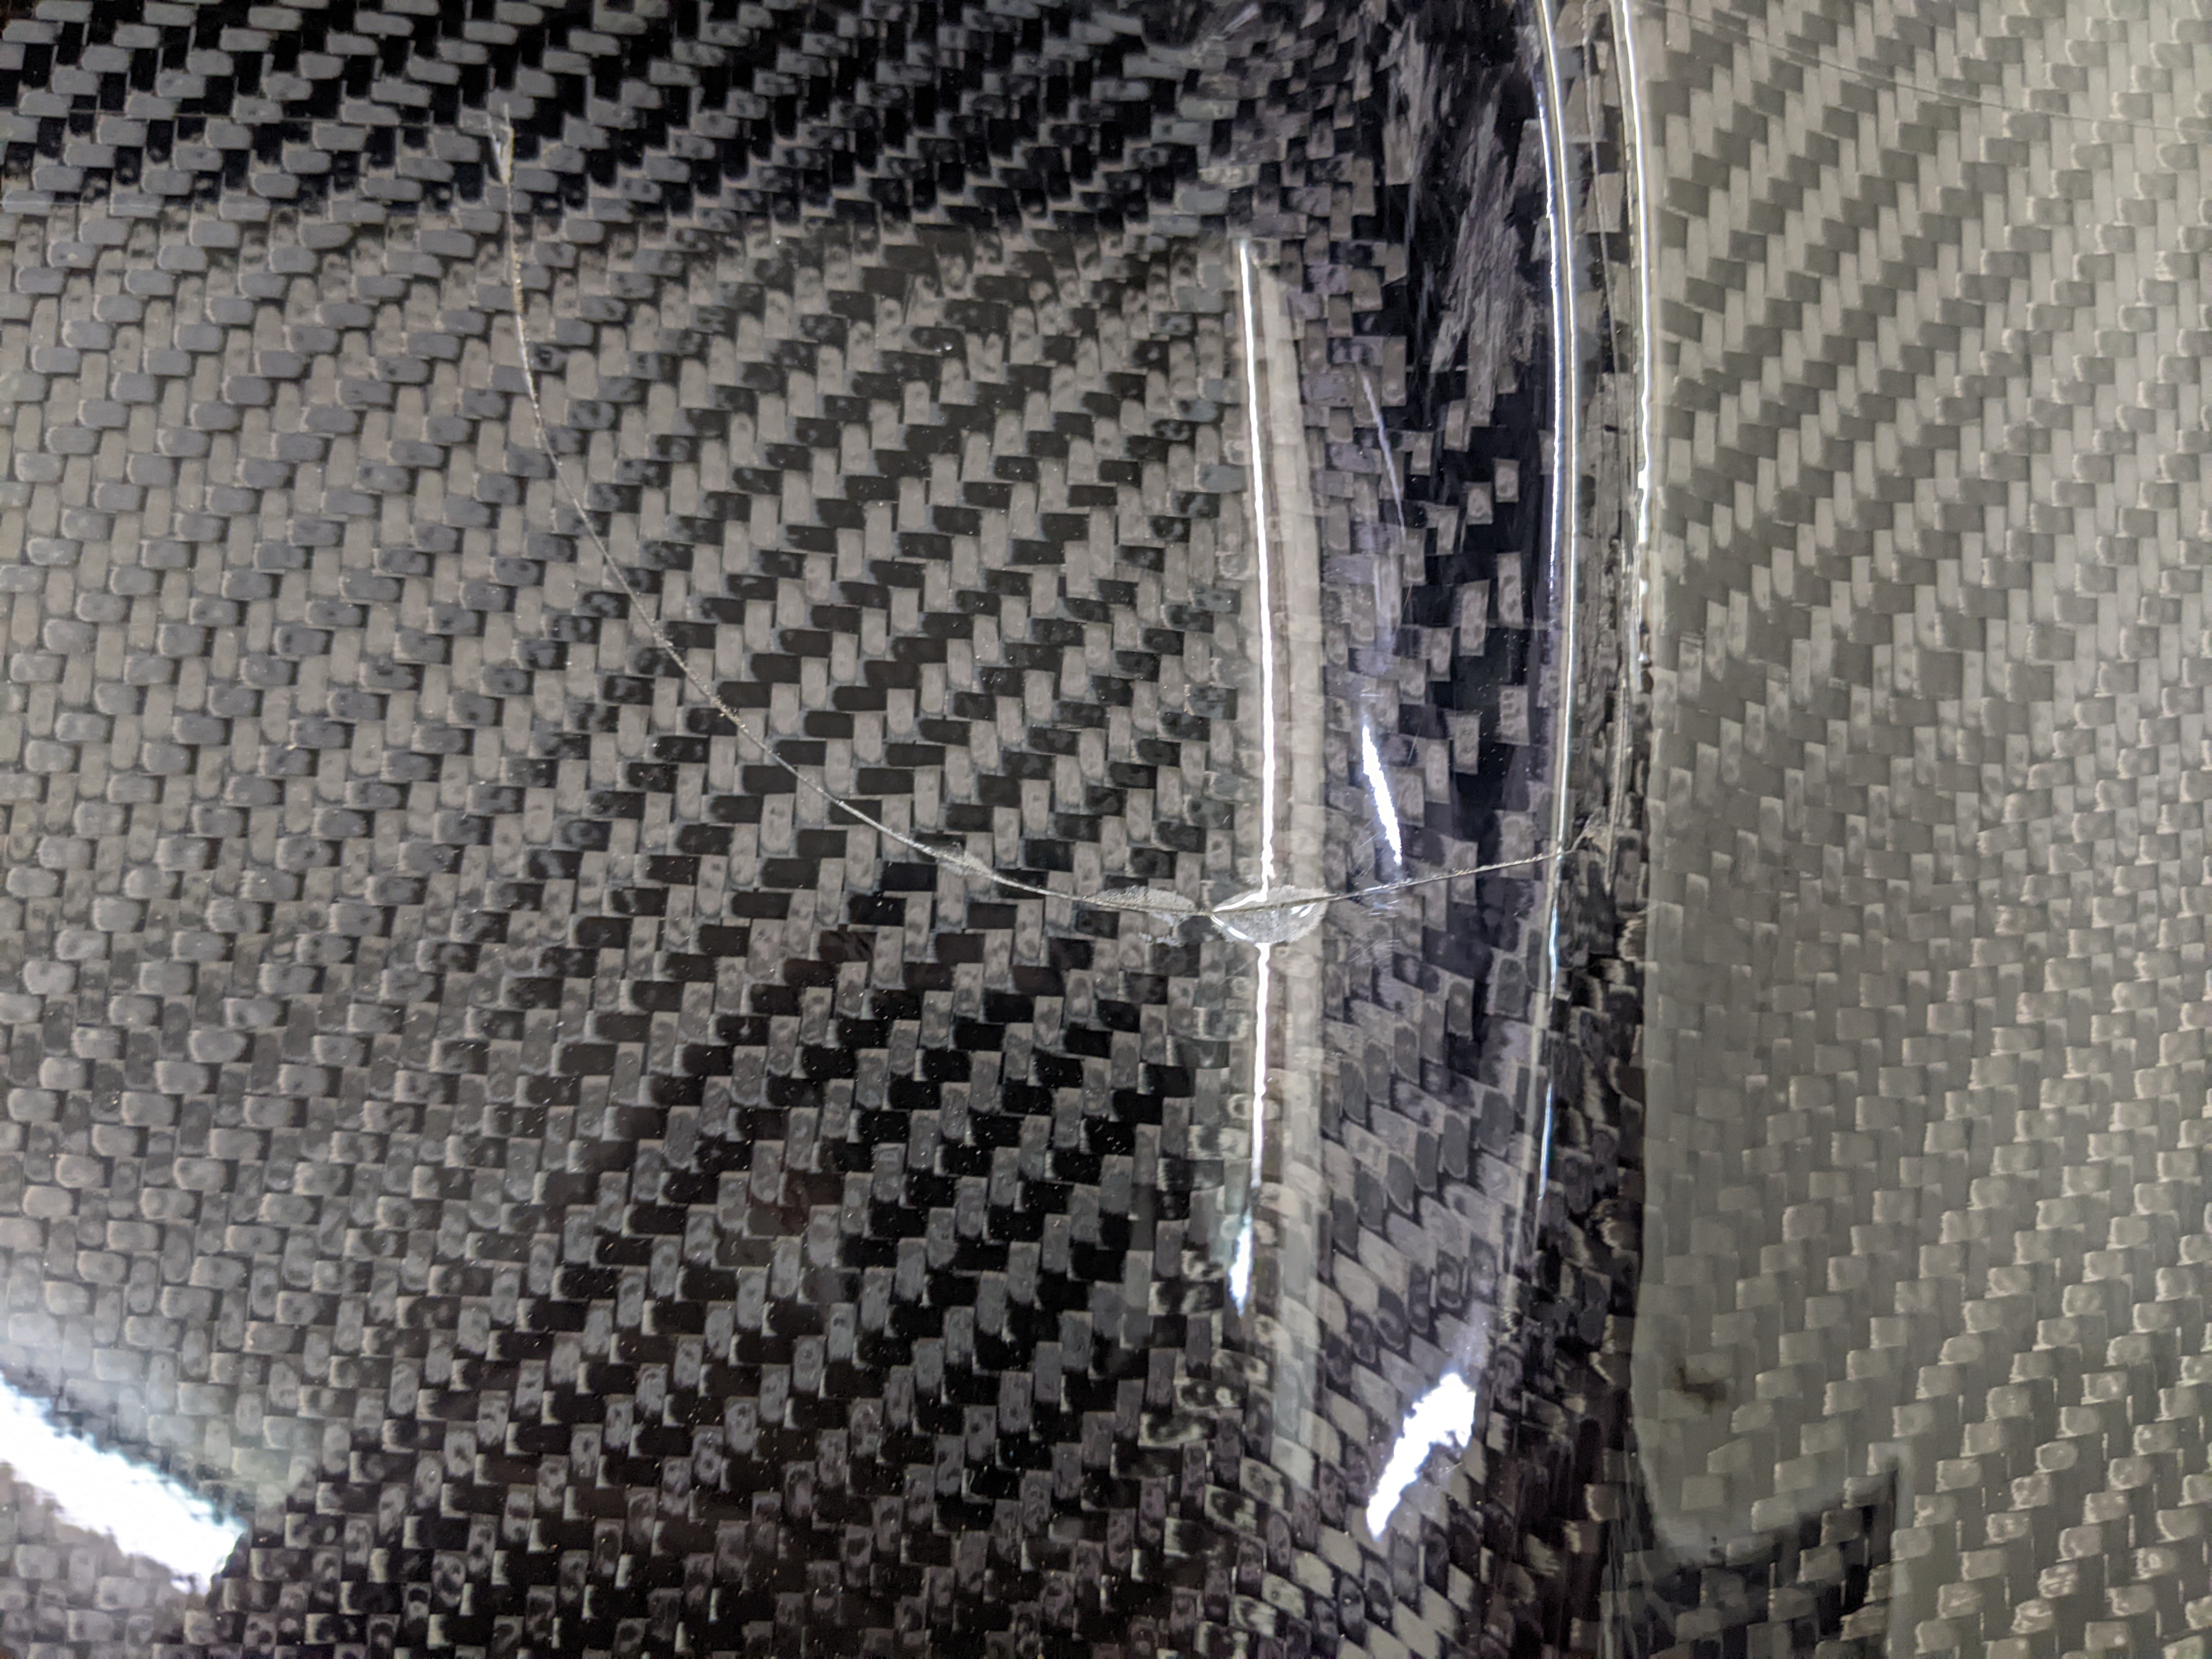 The previous clear bra installer really did a number on this carbon fiber hood. They cut into the hood itself and over time, the carbon fiber hood began to delaminate. What a headache!